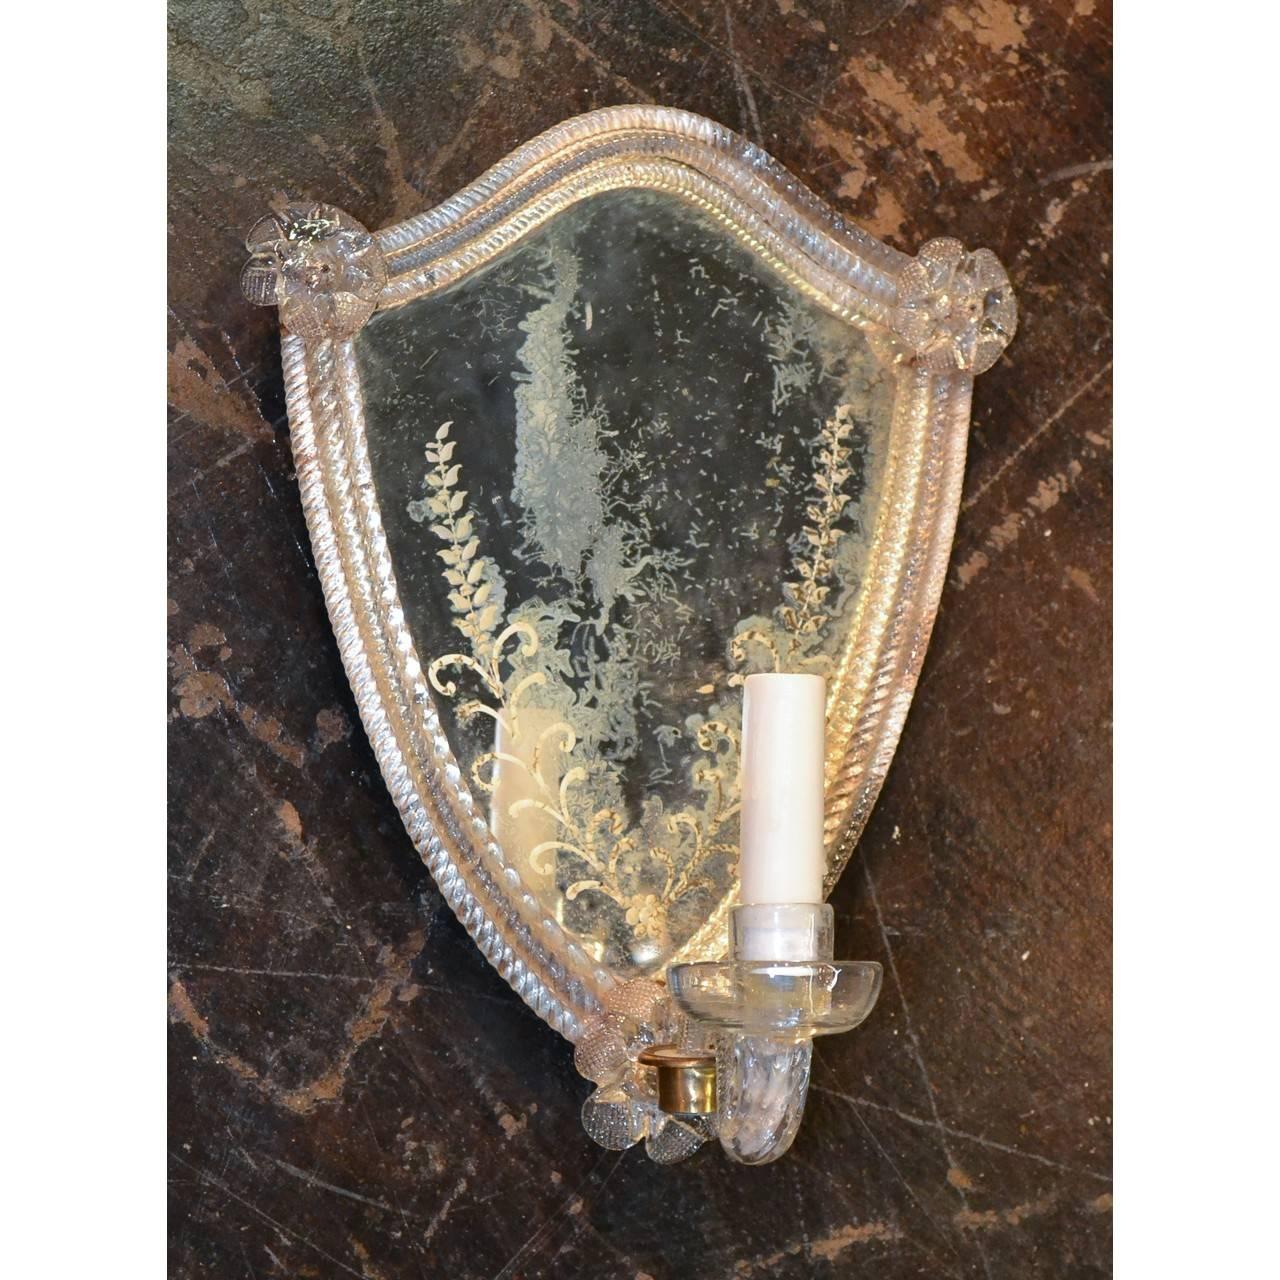 Pretty pair of mirror backed etched Venetian sconce, circa 1920s.
Hard to find pair of Venetian sconce.